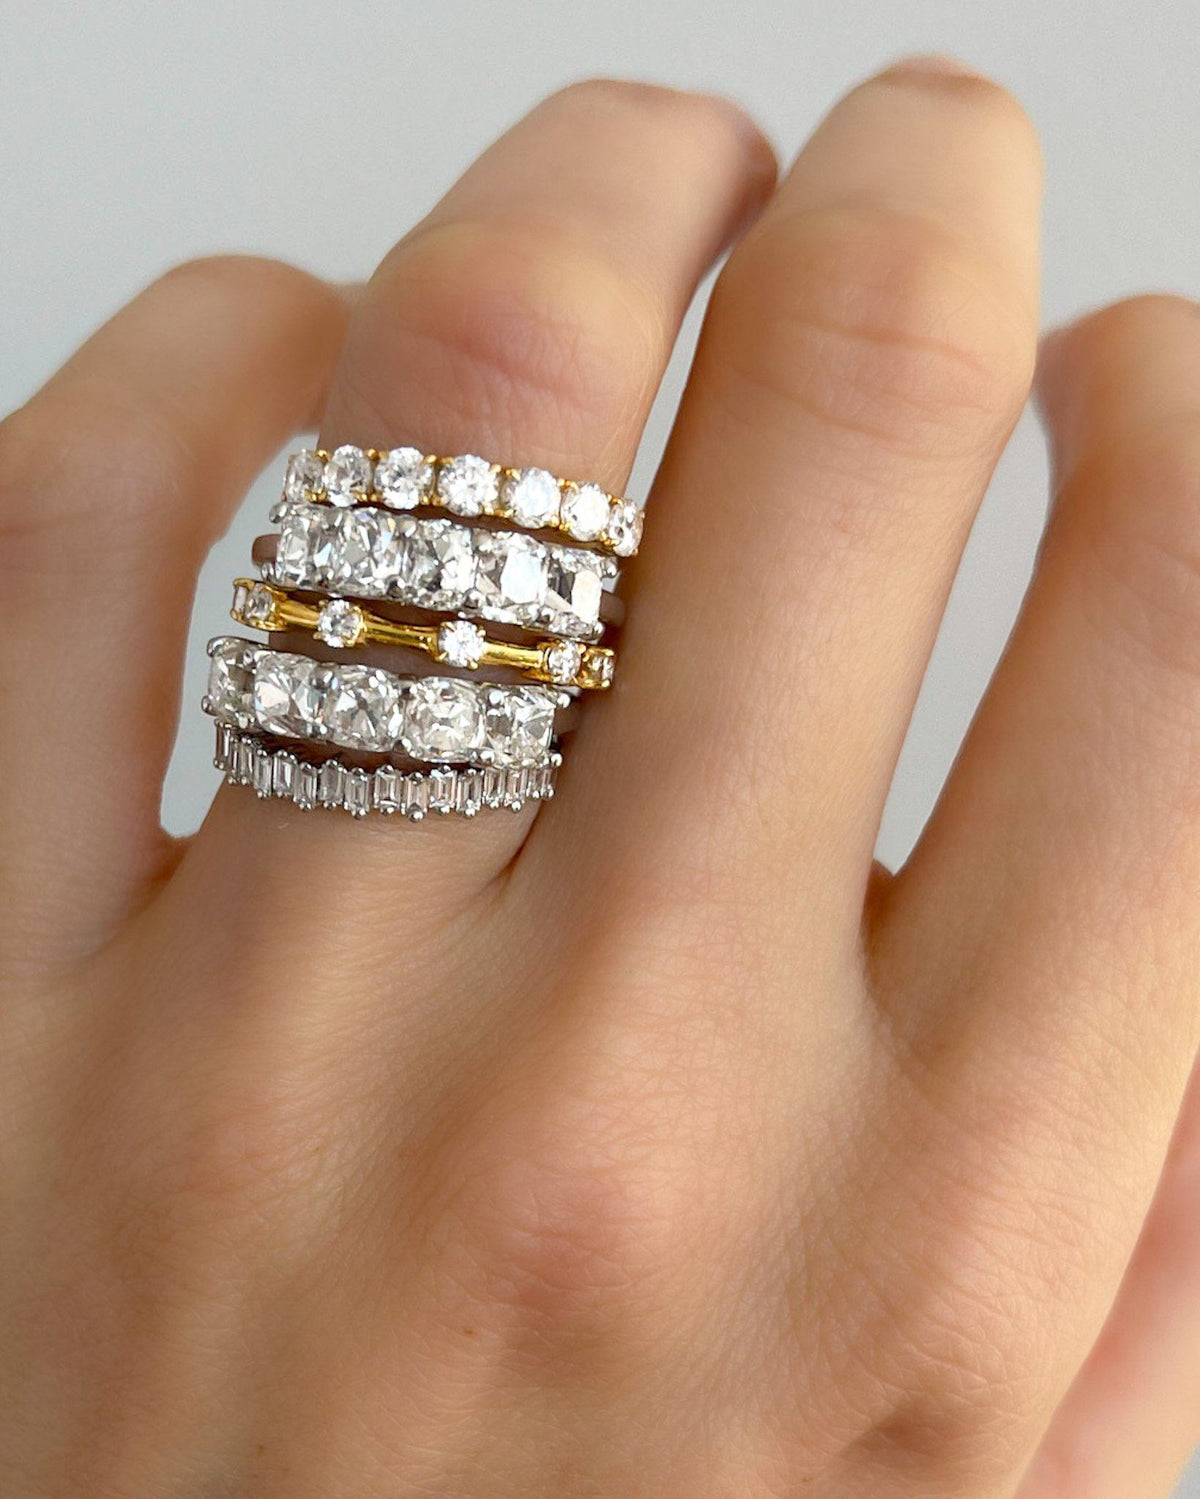 Highlight Claw Diamond Band: Spaced Eternity Band by Good Stone available in Gold and Platinum